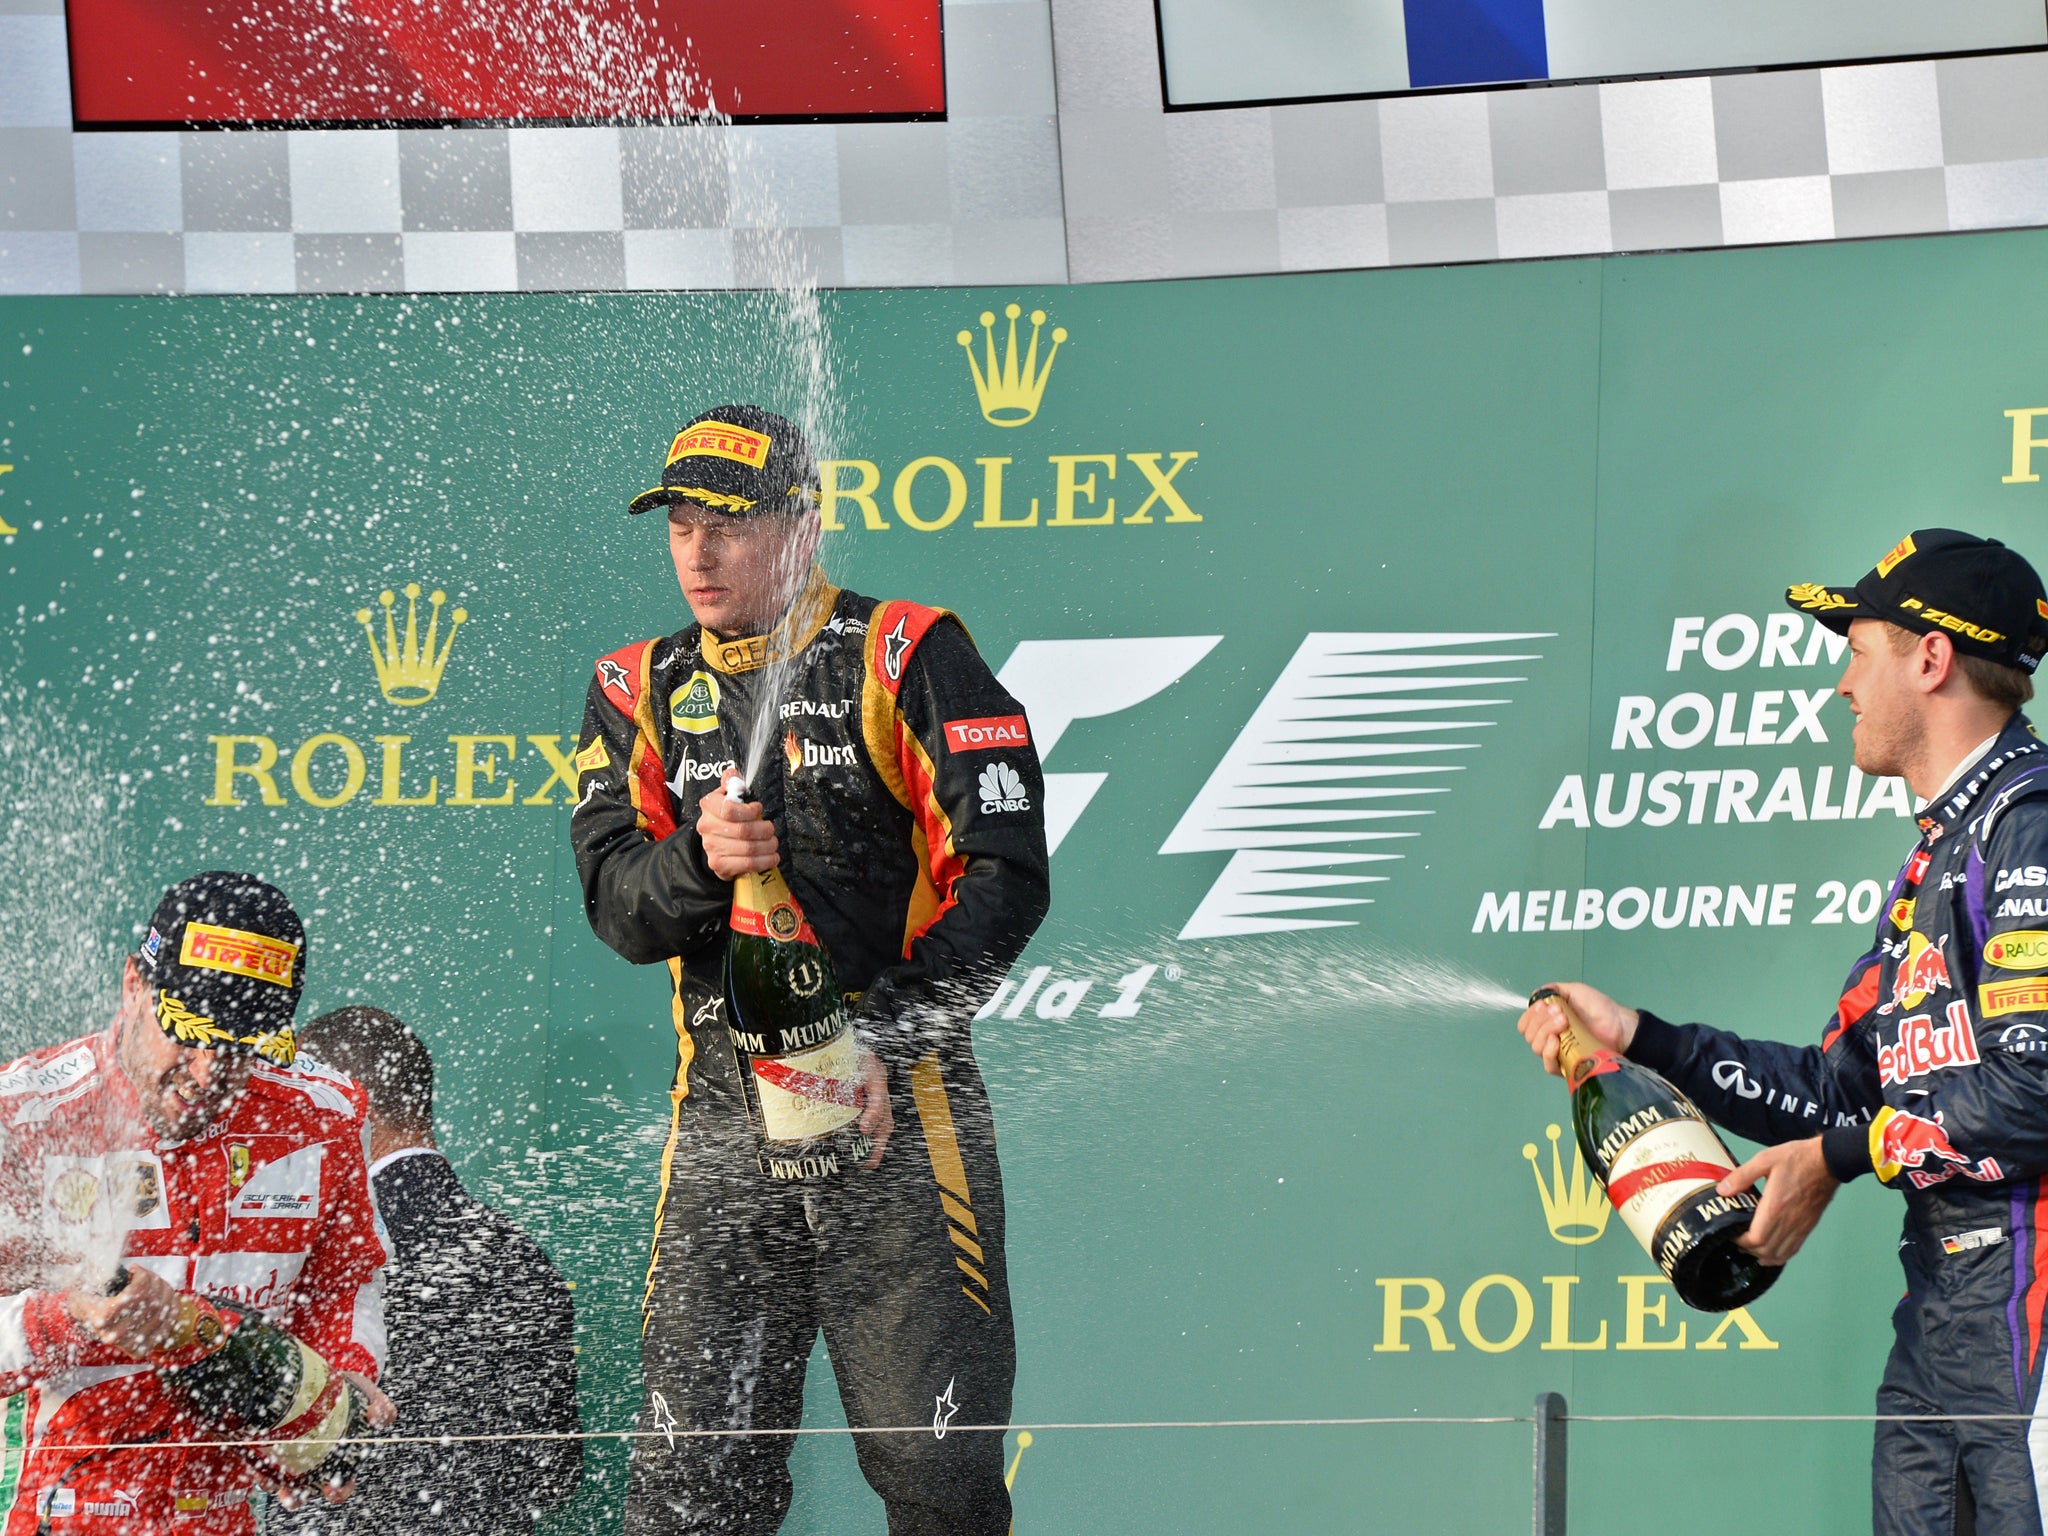 Lotus driver Kimi Raikkonen after his victory, next to second placed Ferrari driver Fernando Alonso (L) and third placed Red Bull driver Sebastian Vettel